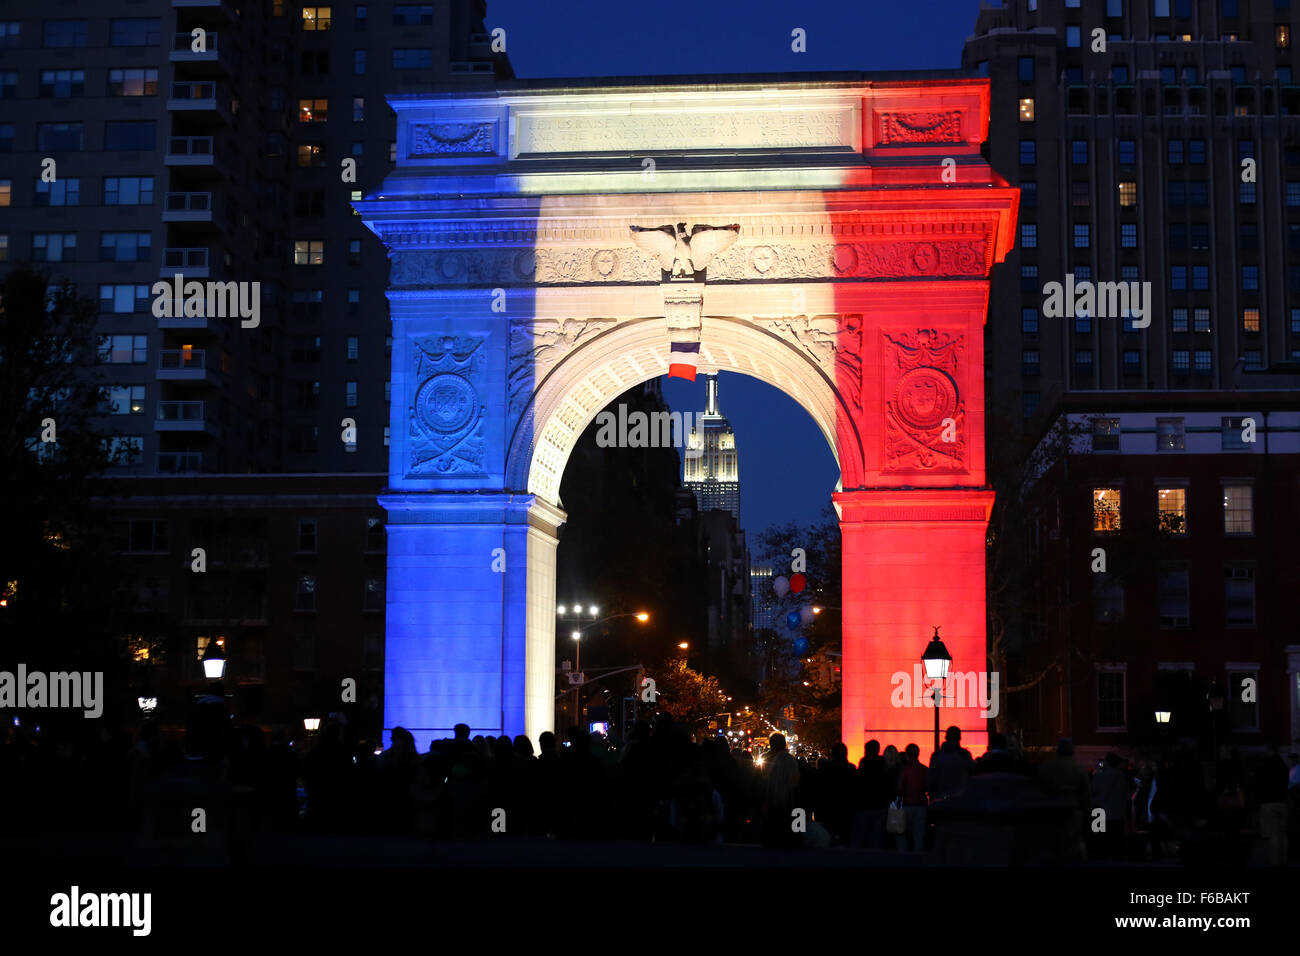 The Washington Arch in Washington Square Park lit up in solidarity w the French after recent terror attacks in Paris. New York, NY. November 15, 2015 Stock Photo